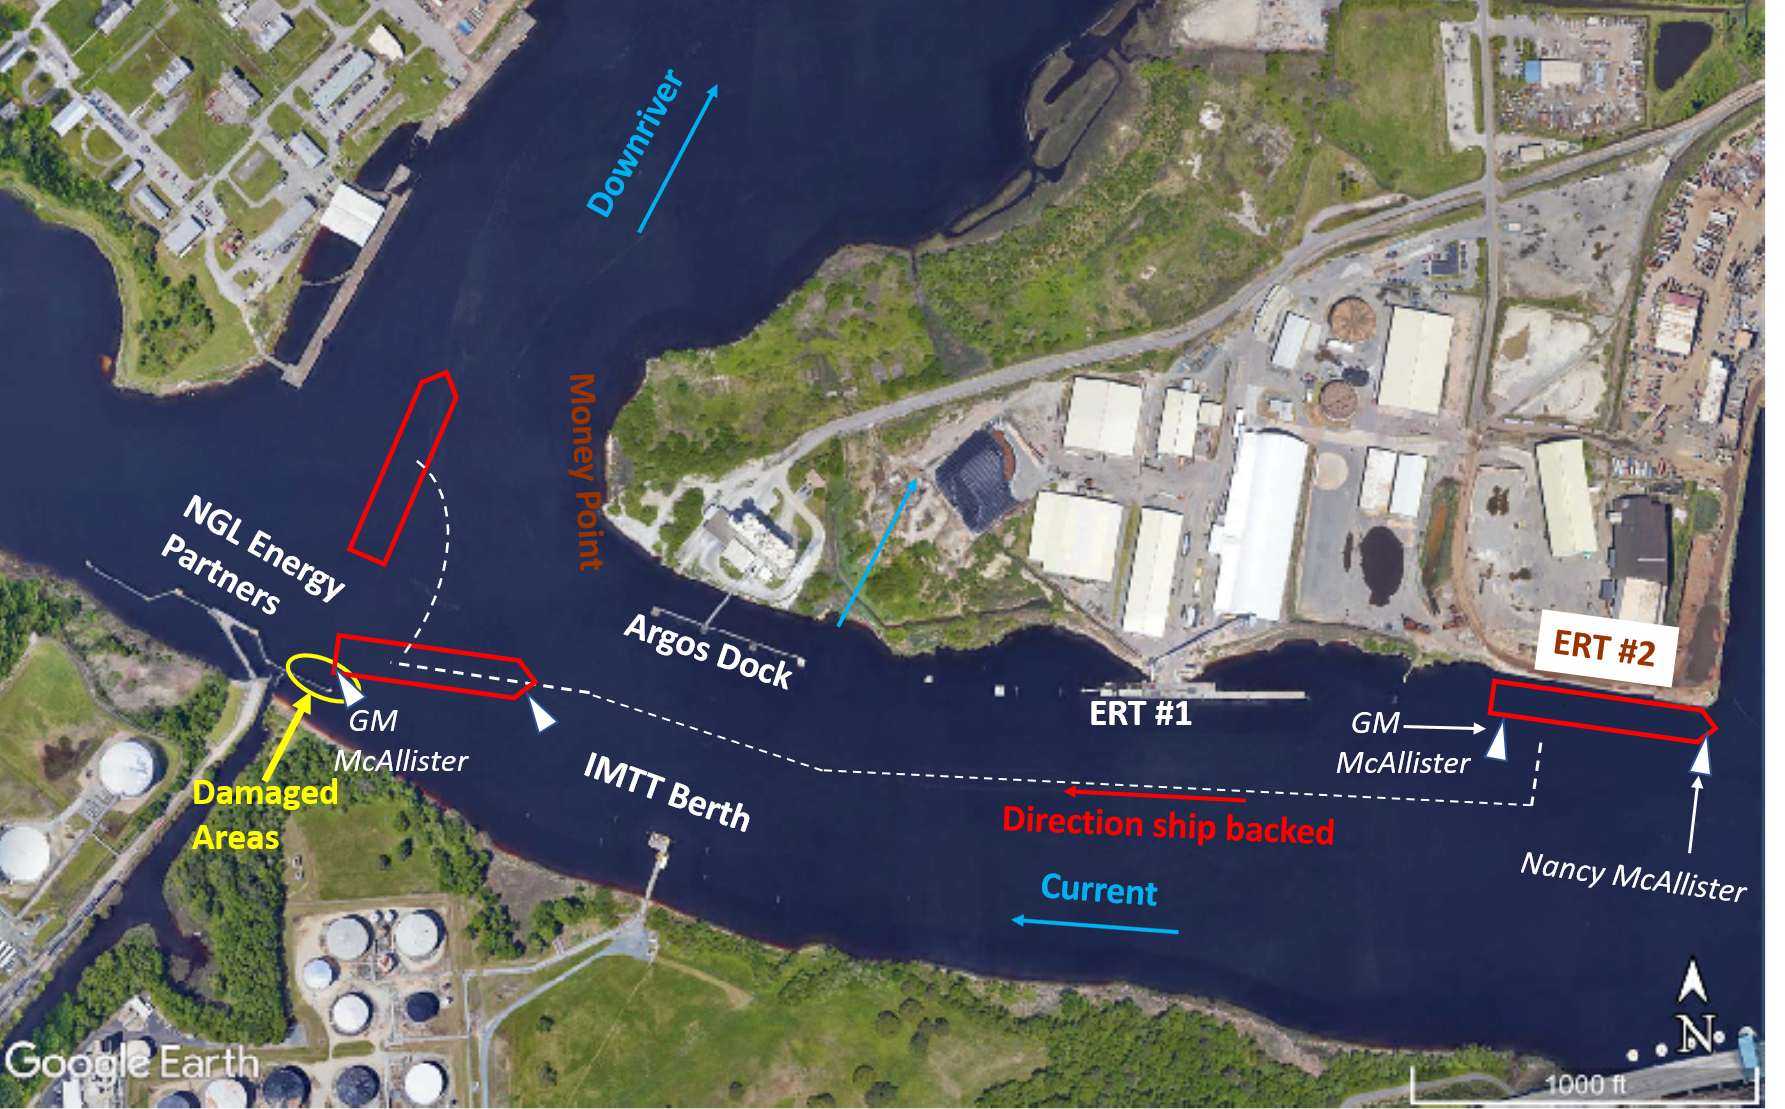 Detailed satellite image of the area where the G.M. McAllister contacted the NGL Energy Partners wharf.